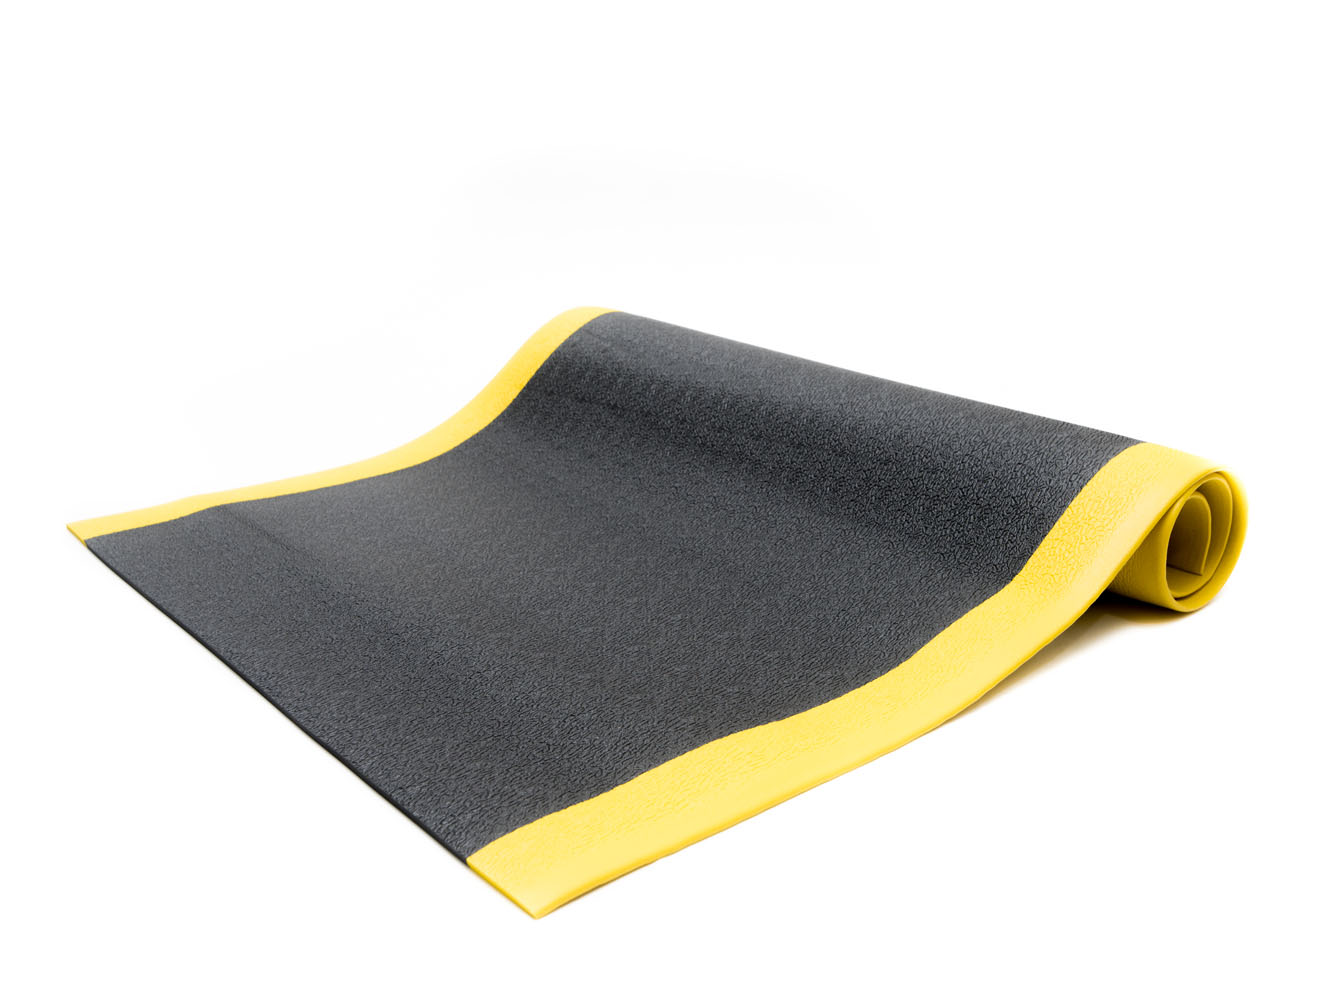 2 Wide x 3 Long x 3/8 Thick Made in USA Black w/Yellow Border Bevelled on All Four Sides Bertech Anti Fatigue Vinyl Foam Floor Mat Textured Pattern 